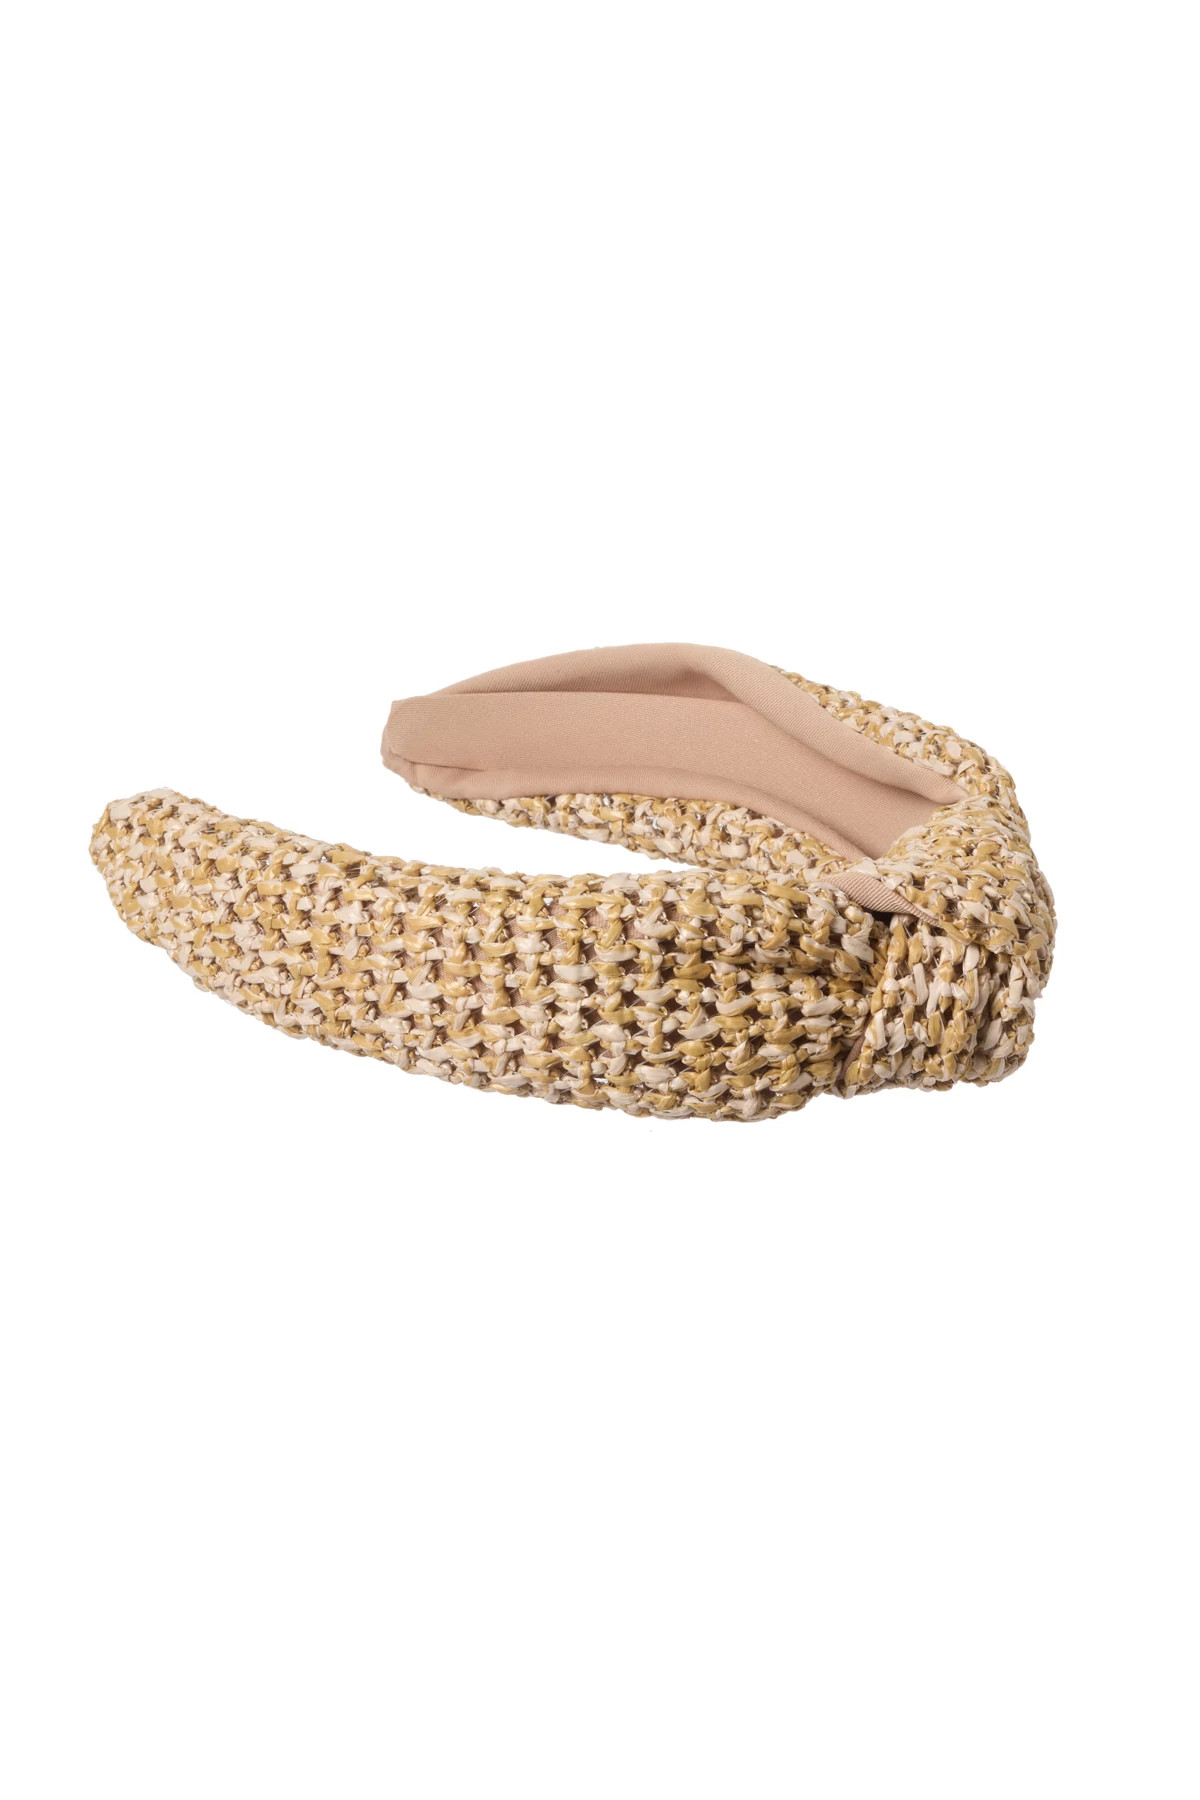 NATURAL Knotted Headband image number 1